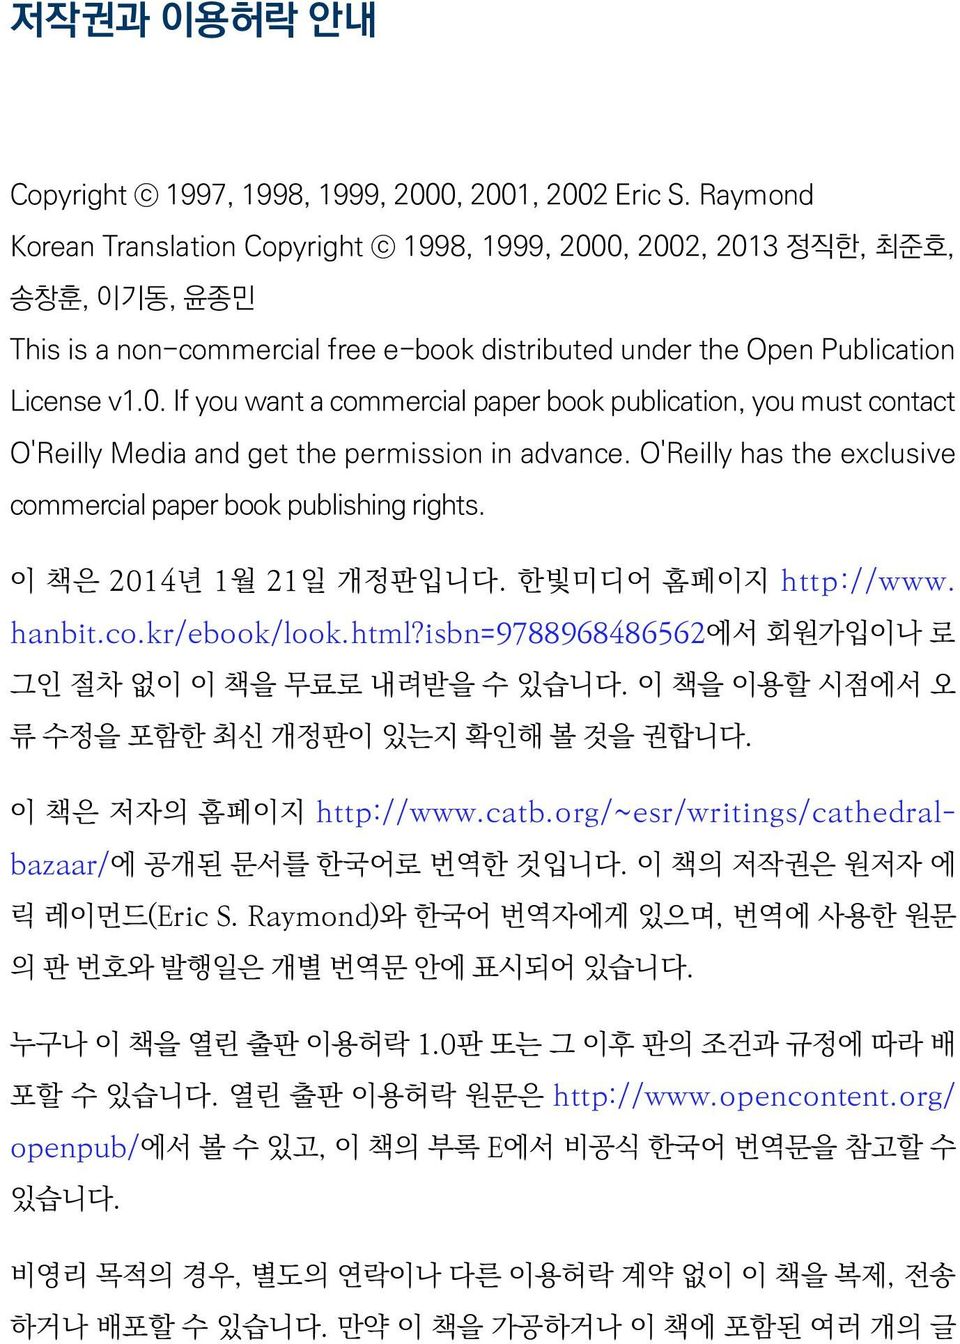 O'Reilly has the exclusive commercial paper book publishing rights. 이 책은 2014년 1월 21일 개정판입니다. 한빛미디어 홈페이지 http://www. hanbit.co.kr/ebook/look.html?